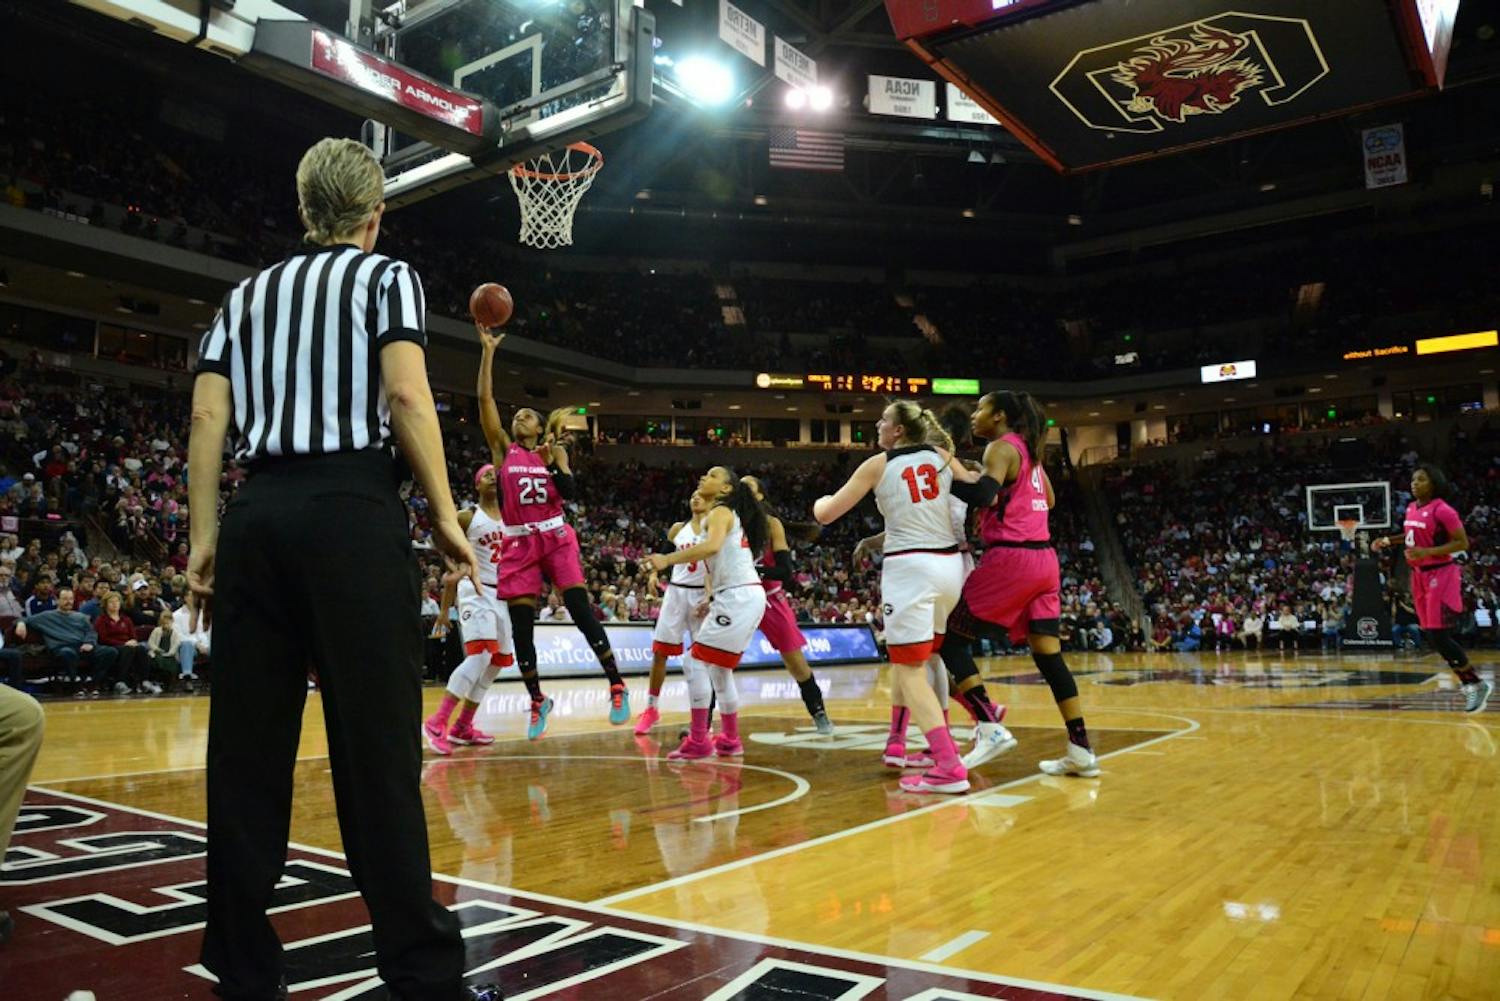 Tiffany Mitchell (25) of the South Carolina Gamecocks gets the ball out of the Georgia Bulldogs' reach long enough to score her first-of-many two-pointers during the first quarter. South Carolina Gamecocks vs Georgia Bulldogs. Colonial Life Arena, Columbia, SC. February 18, 2016